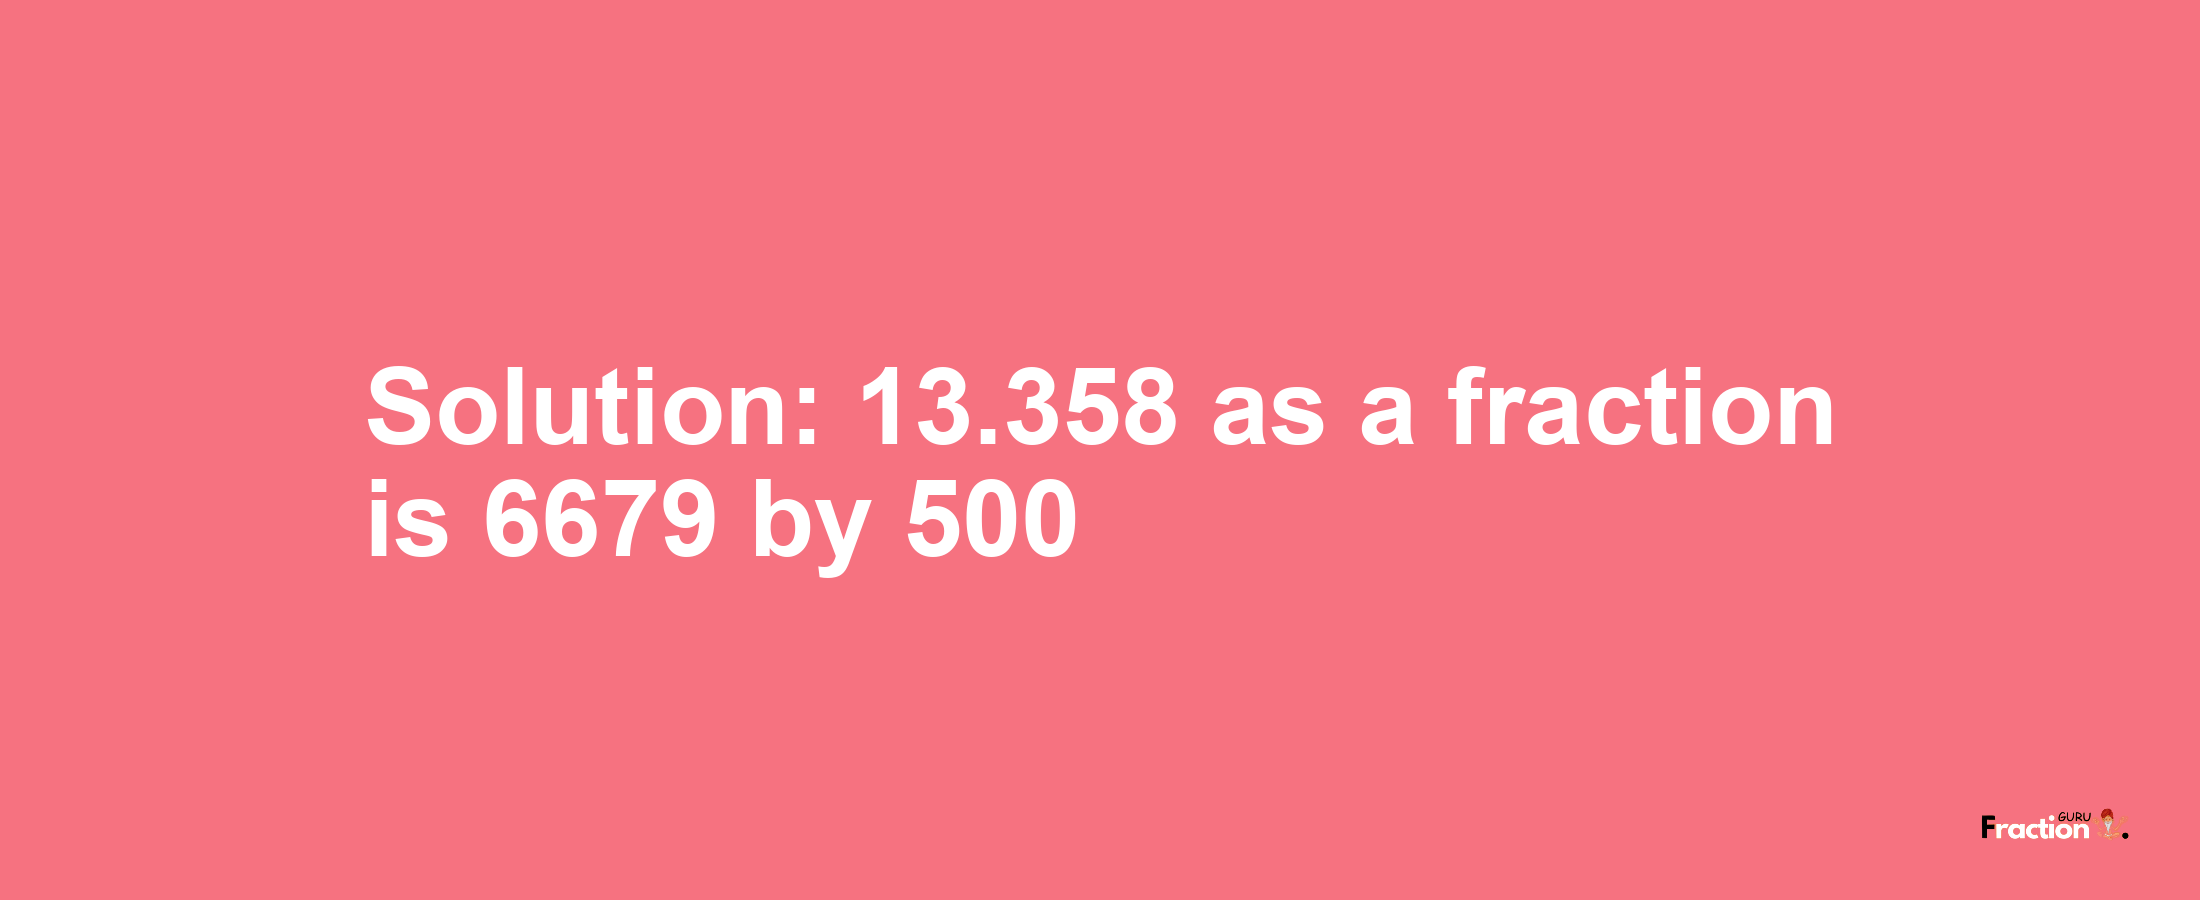 Solution:13.358 as a fraction is 6679/500